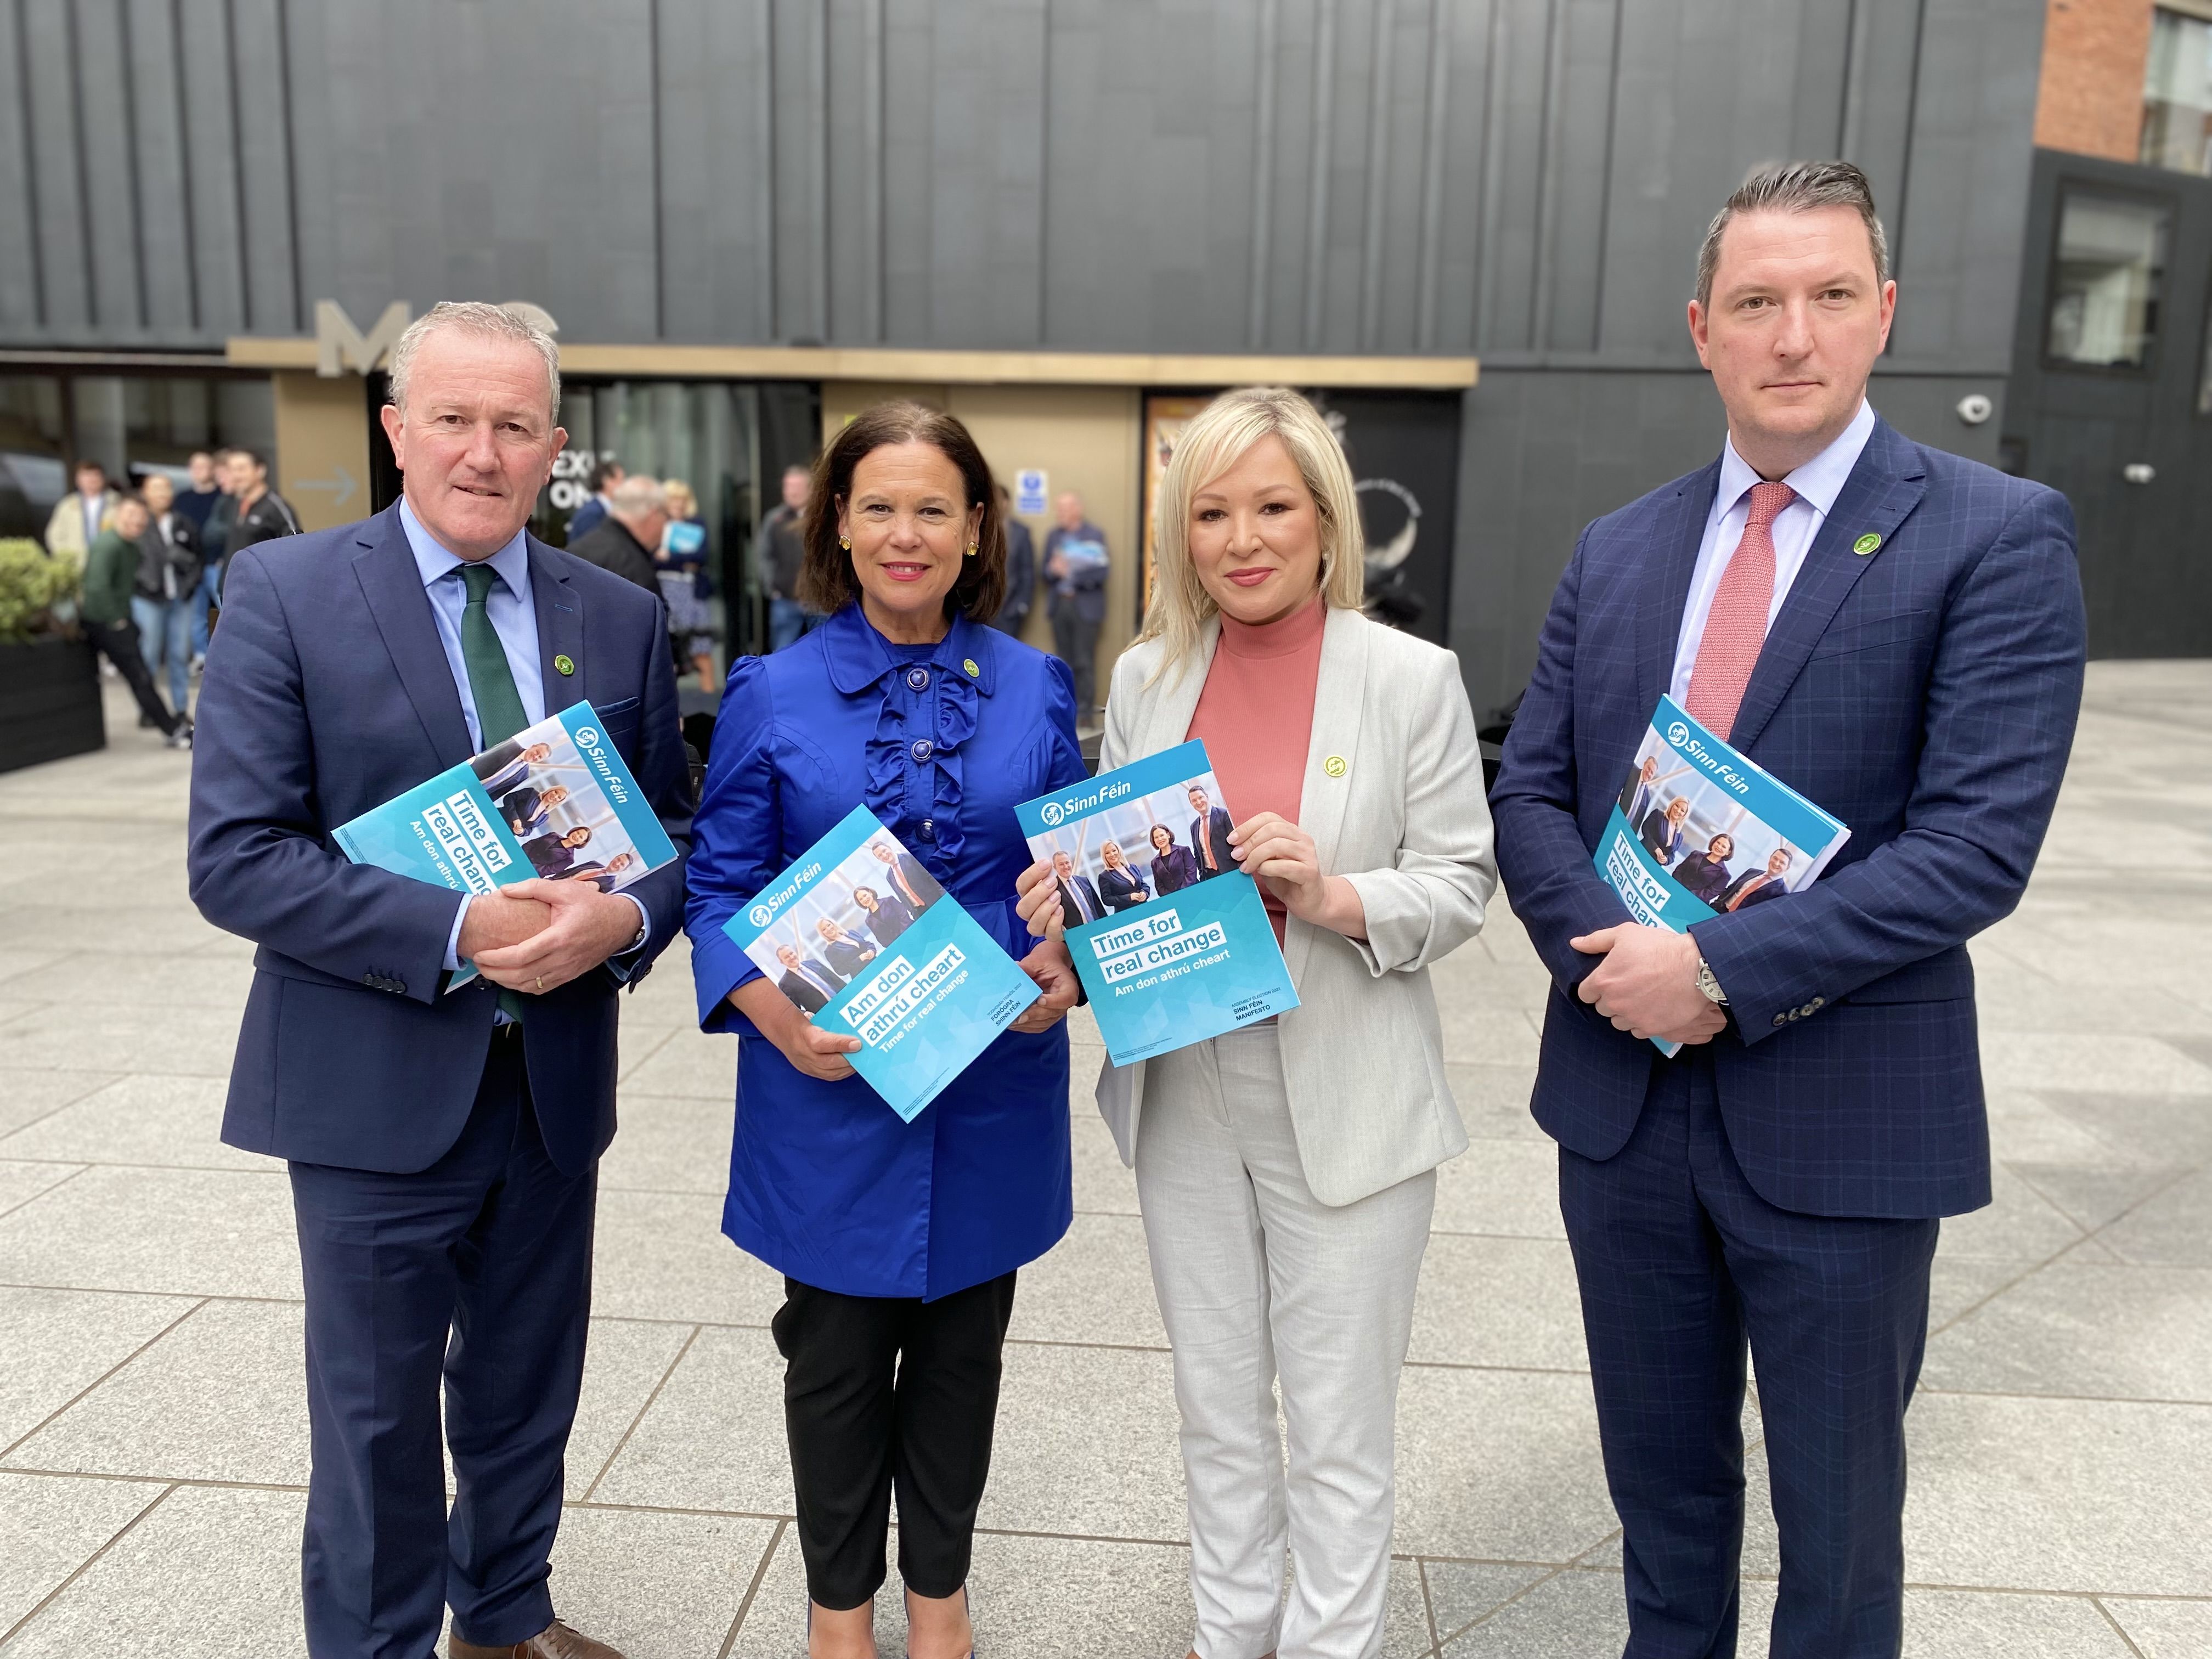 SINN FEIN MANIFESTO LAUNCH: : The DUP are trying to scare unionist voters about Sinn Féin\'s election chances